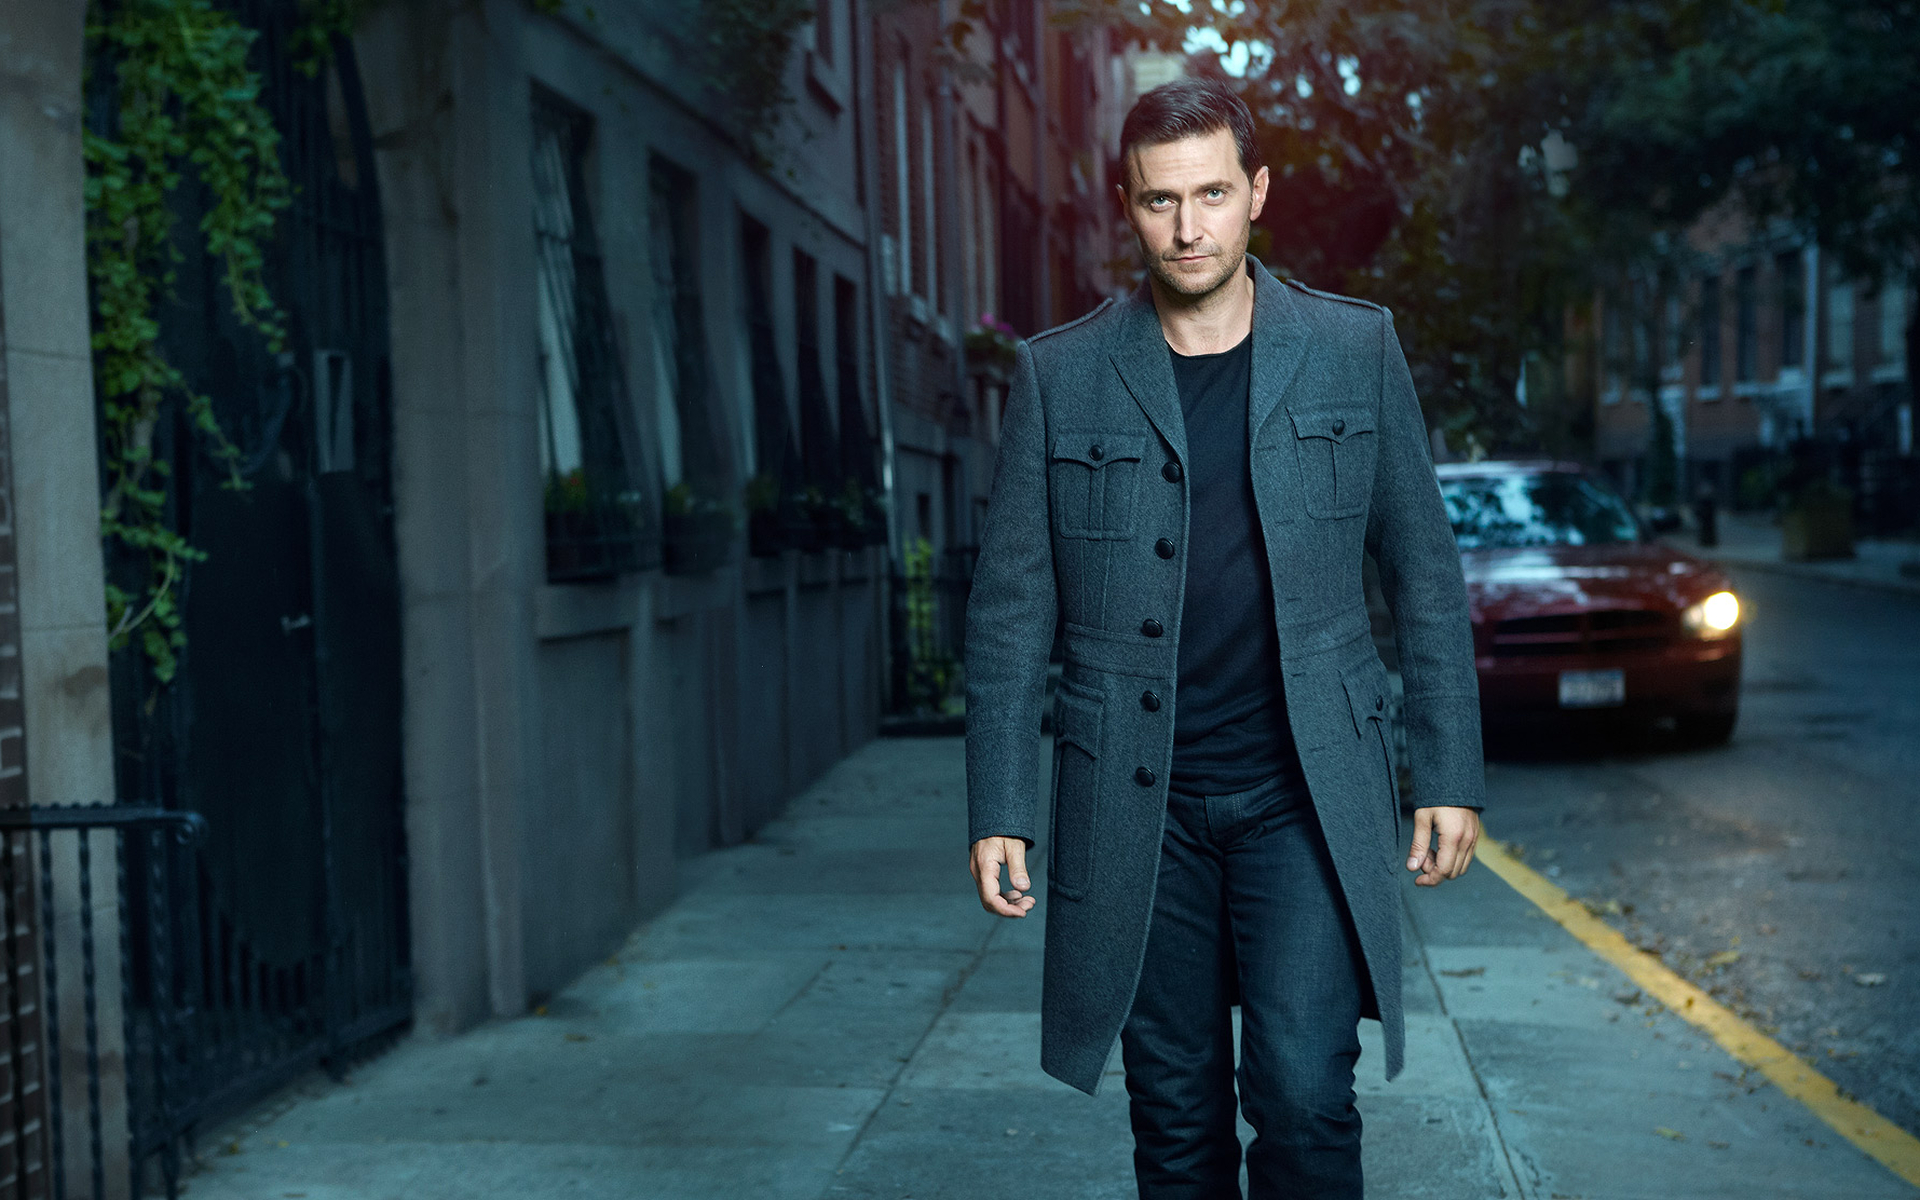  Richard Armitage HQ Background Wallpapers